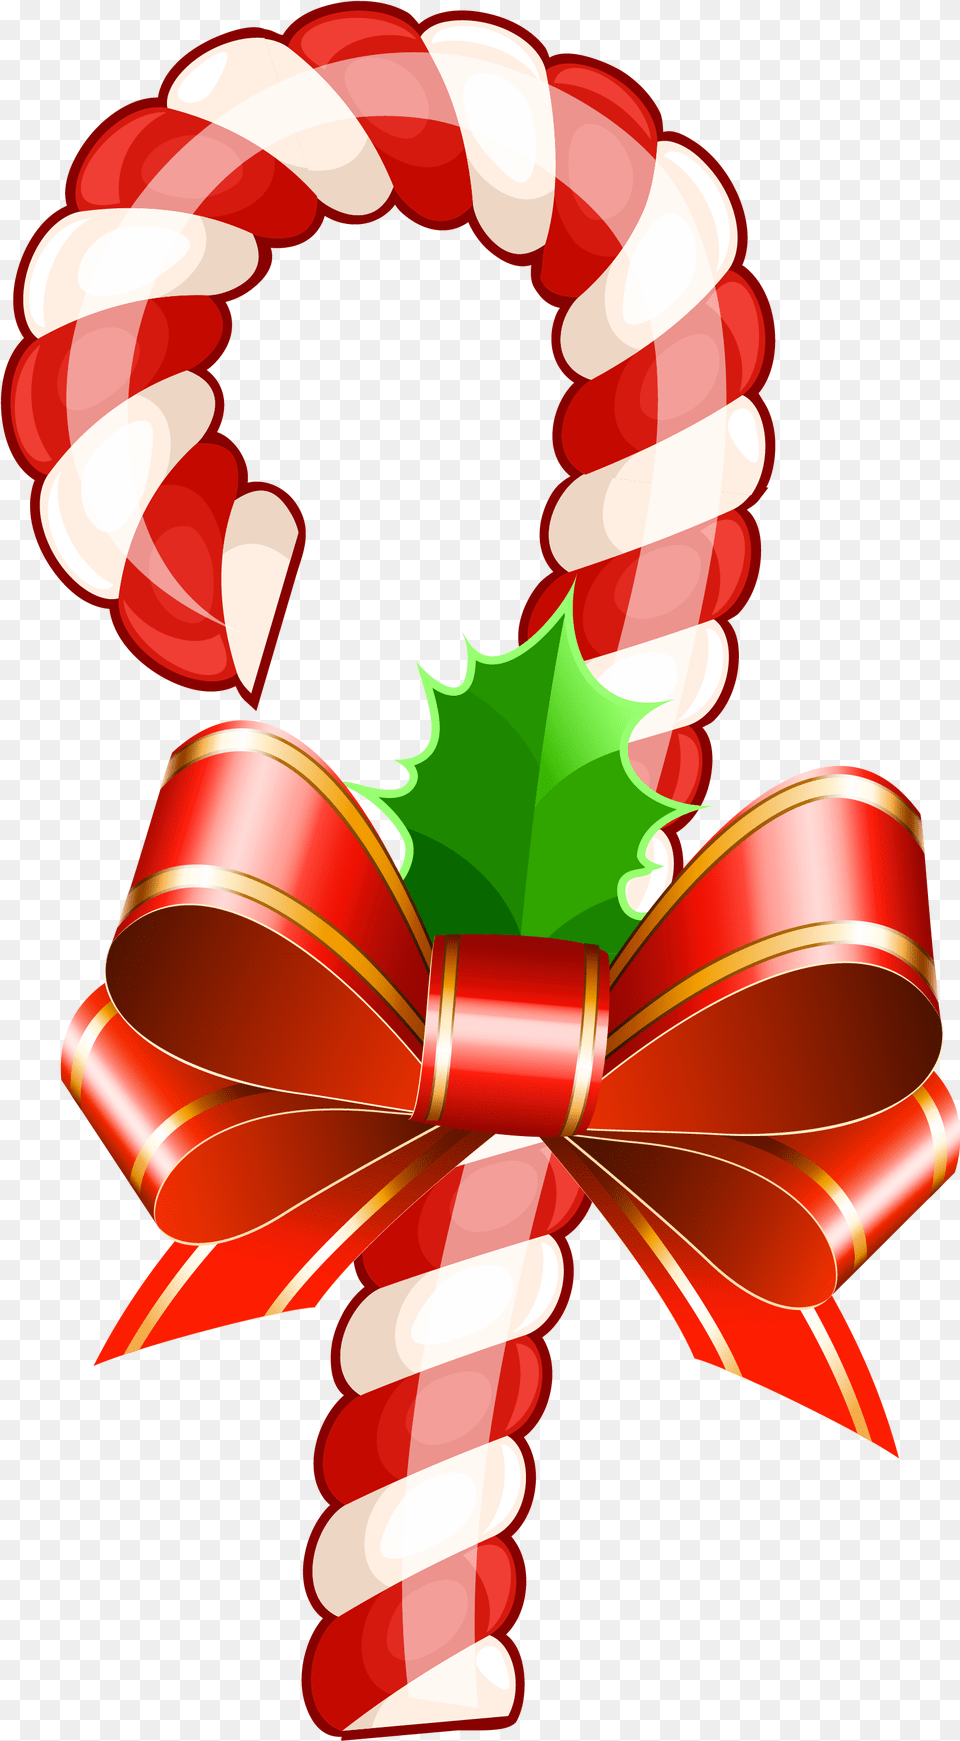 Christmas Candy Images Free Download Cute Christmas Candy Cane, Food, Sweets, Dynamite, Weapon Png Image